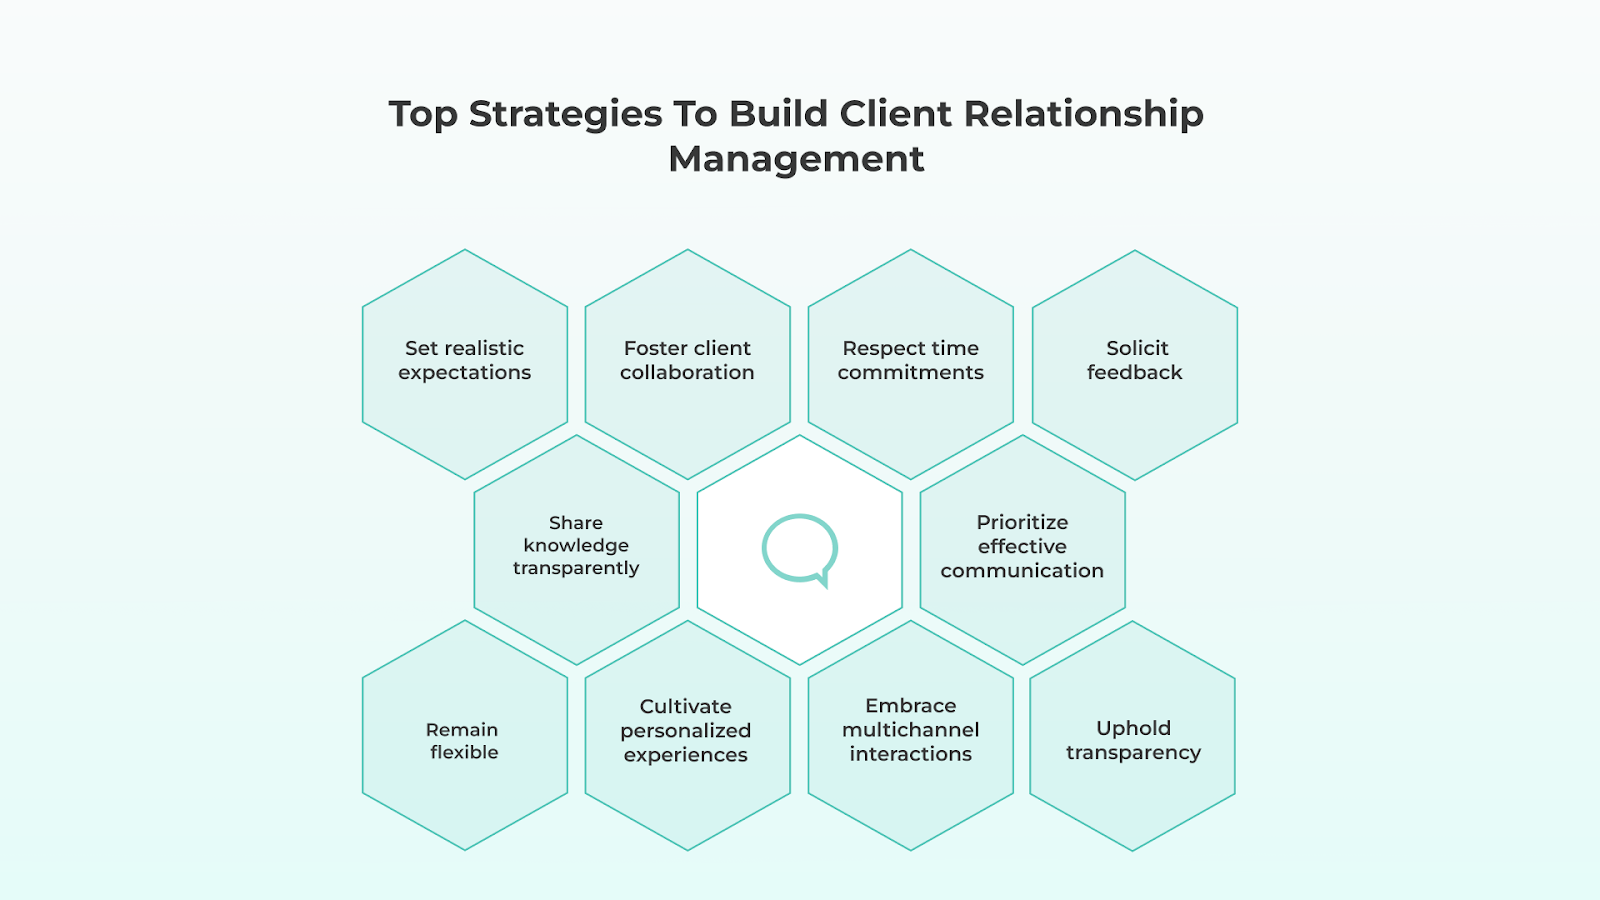 Top Strategies to Build Client Relationship Management